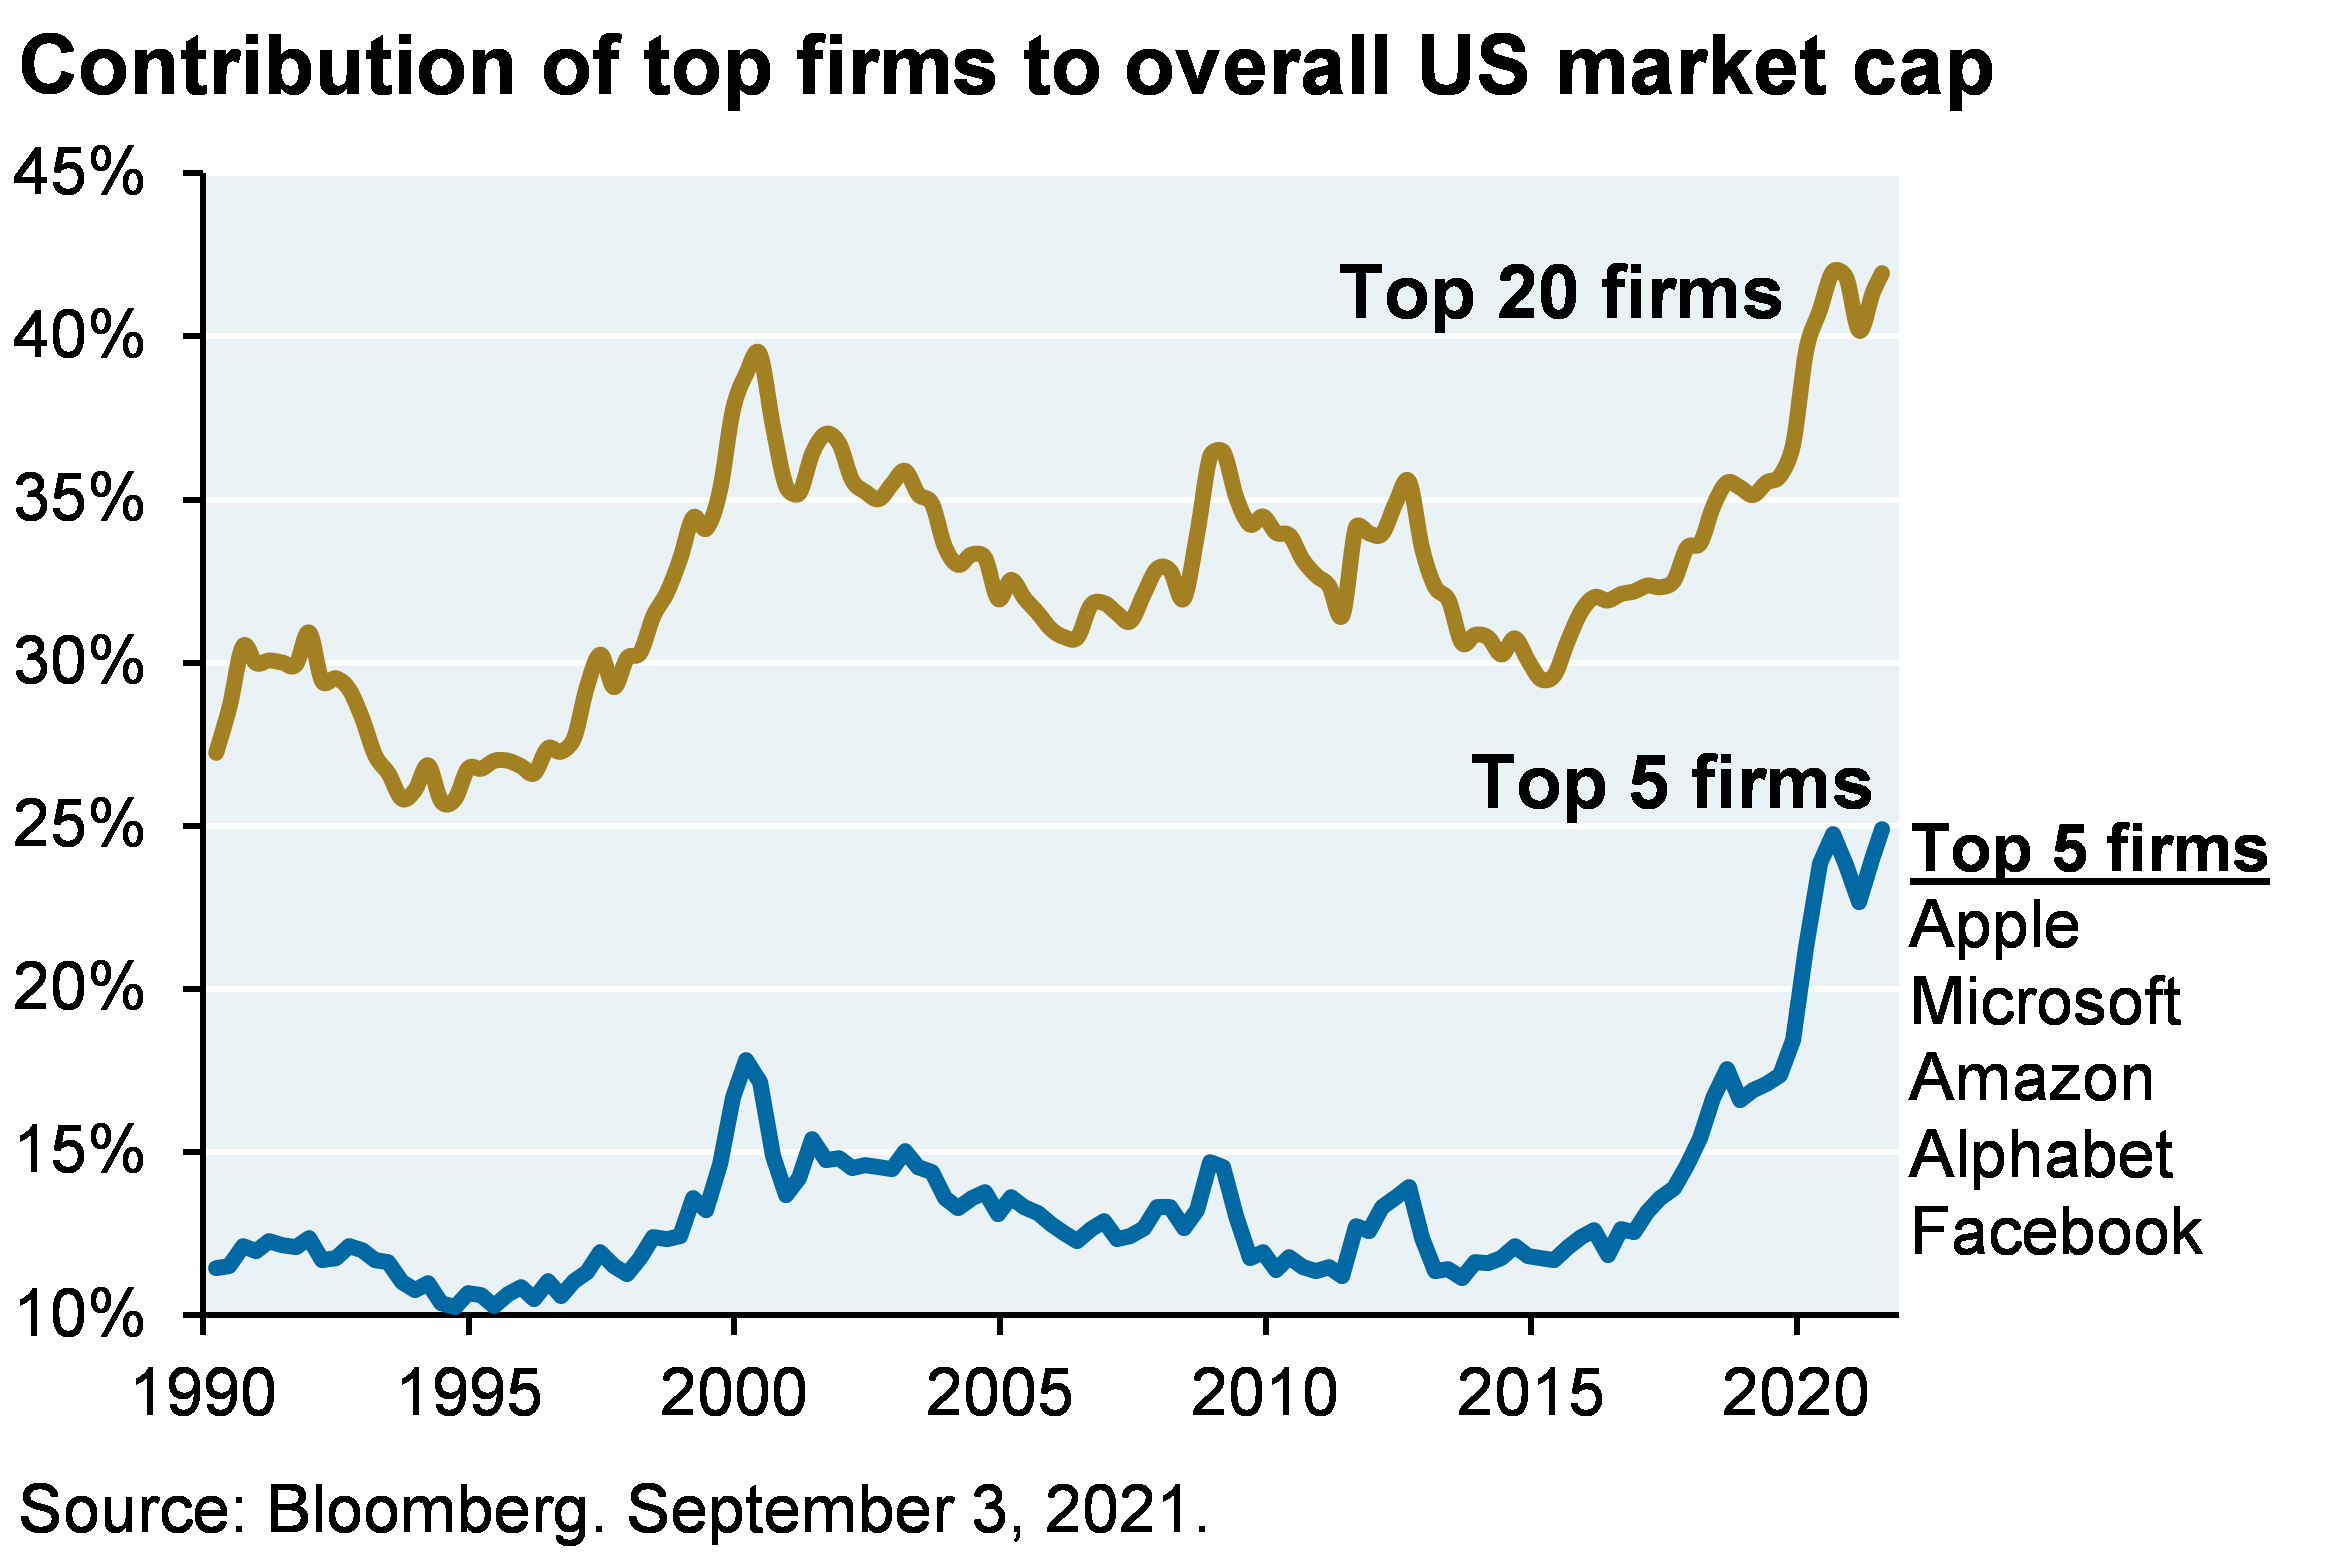 Line chart shows contribution of top firms to overall US market cap. Chart shows that the top 20 firms contribution to overall US market cap has increased from just over 25% in 1990 to a current level of over 40%. The top 5 firms (Apple, Microsoft, Amazon, Alphabet, Facebook) have grown from just over 10% of overall US market cap to 25% as of August 2021.